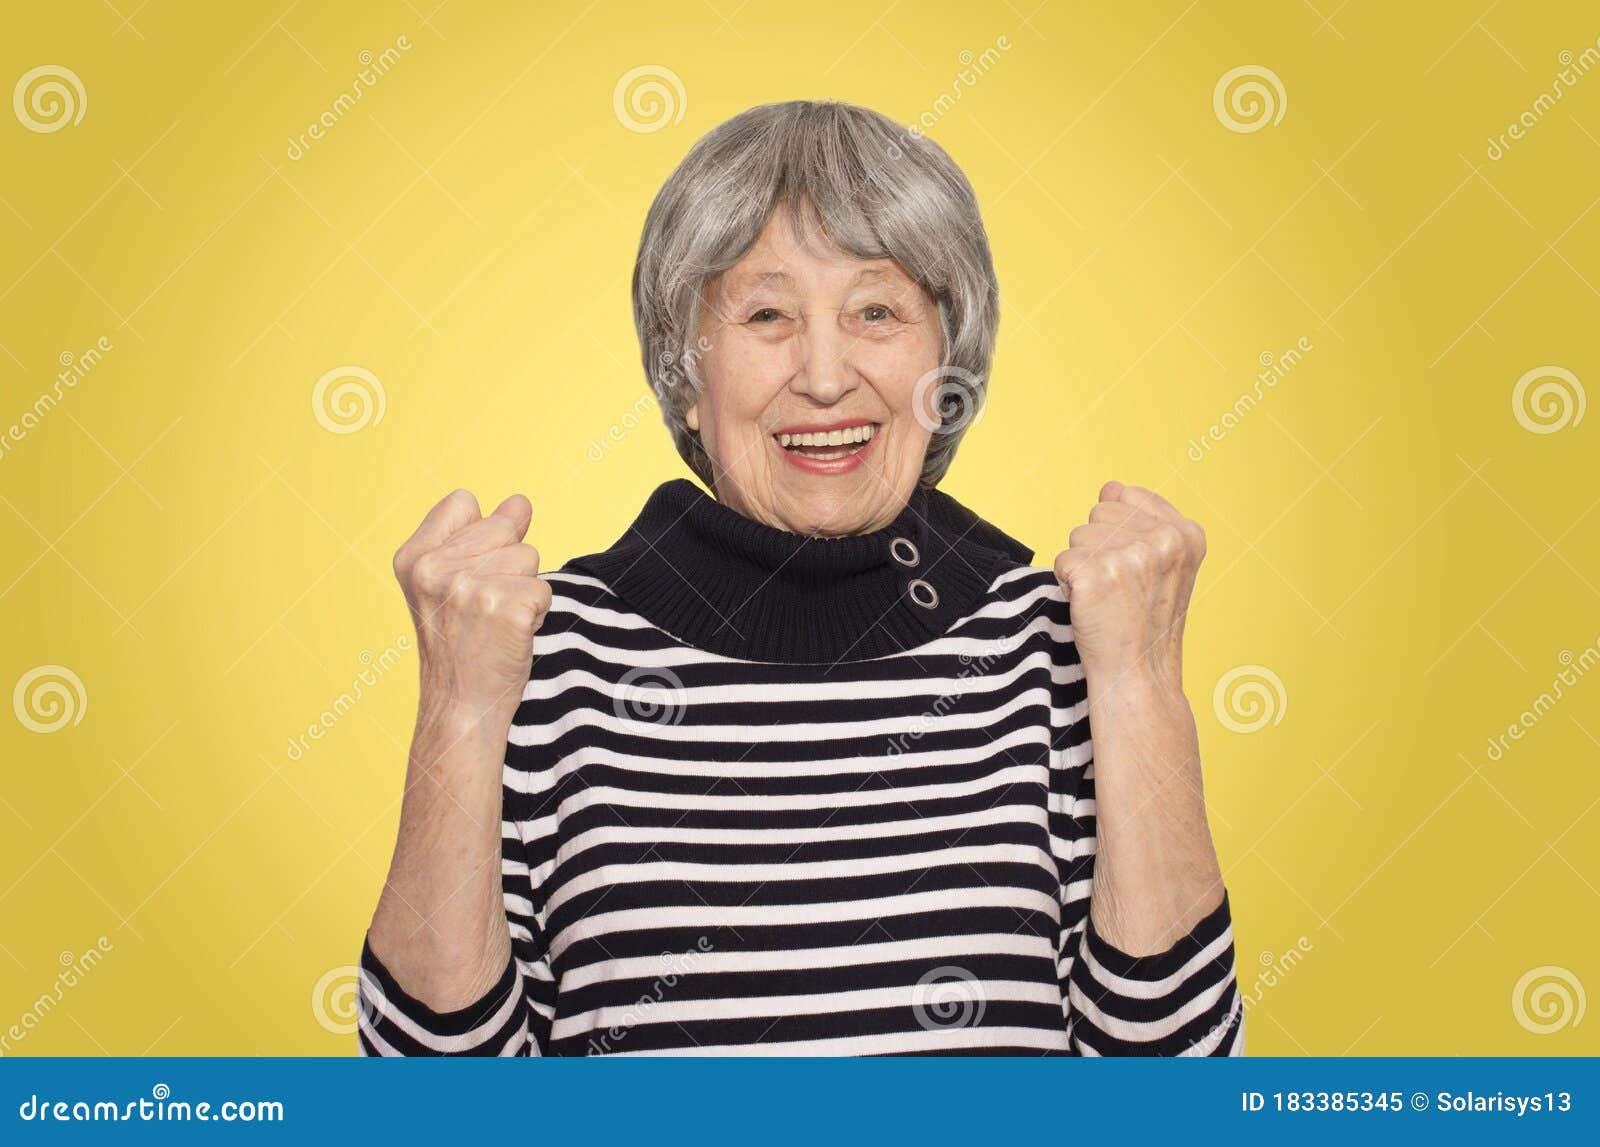 The Portrait of a Cheerful Senior Woman Gesturing Victory Stock Image ...